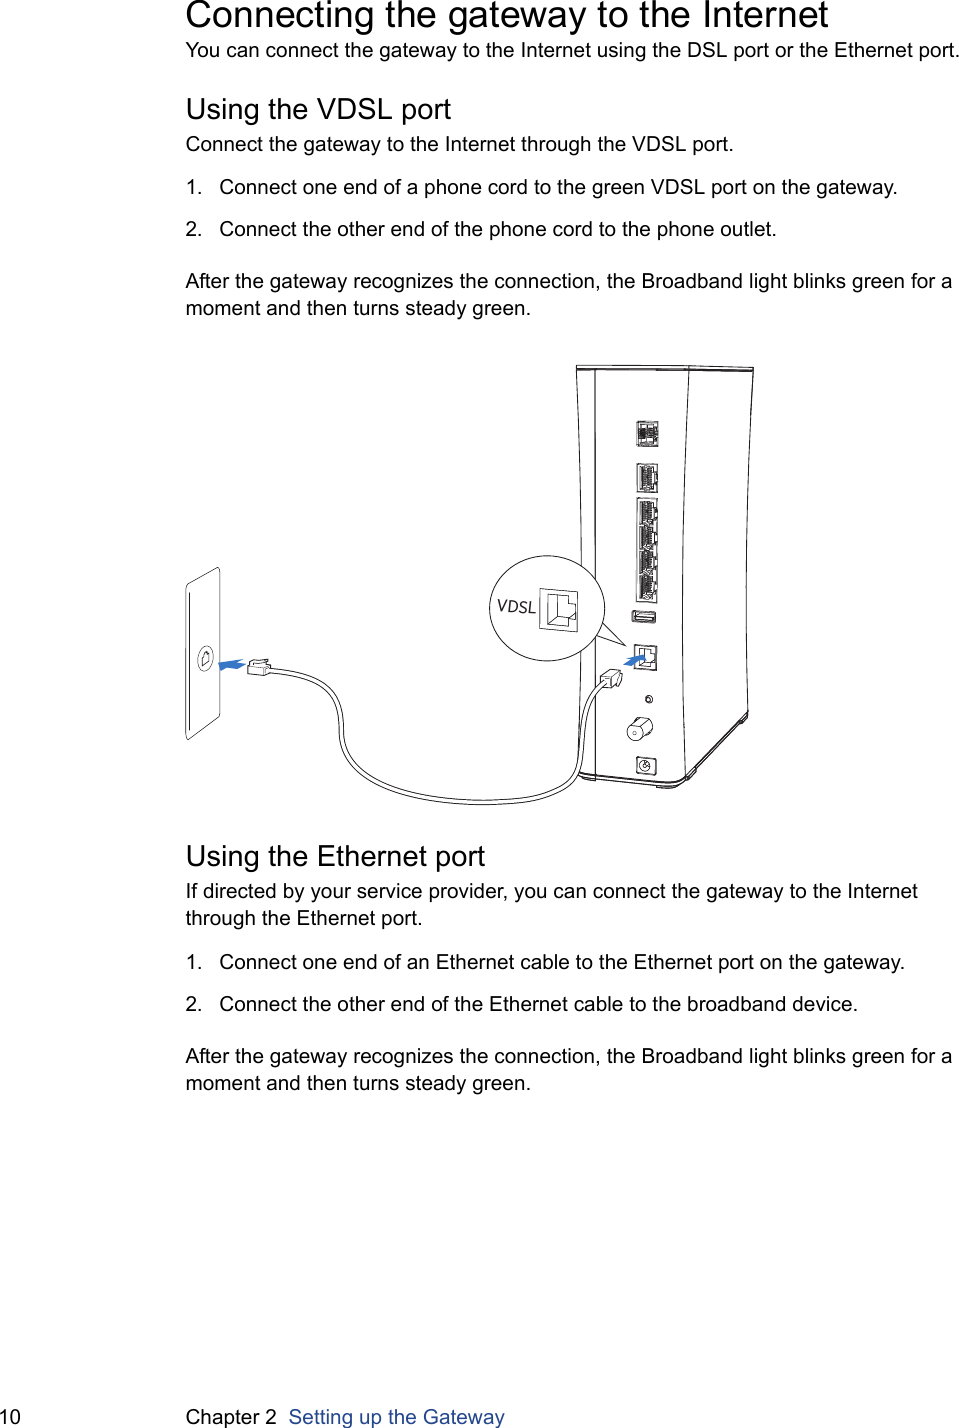 10 Chapter 2  Setting up the GatewayConnecting the gateway to the InternetYou can connect the gateway to the Internet using the DSL port or the Ethernet port.Using the VDSL portConnect the gateway to the Internet through the VDSL port.1. Connect one end of a phone cord to the green VDSL port on the gateway.2. Connect the other end of the phone cord to the phone outlet.After the gateway recognizes the connection, the Broadband light blinks green for a moment and then turns steady green.Using the Ethernet portIf directed by your service provider, you can connect the gateway to the Internet through the Ethernet port.1. Connect one end of an Ethernet cable to the Ethernet port on the gateway.2. Connect the other end of the Ethernet cable to the broadband device.After the gateway recognizes the connection, the Broadband light blinks green for a moment and then turns steady green. VDSL